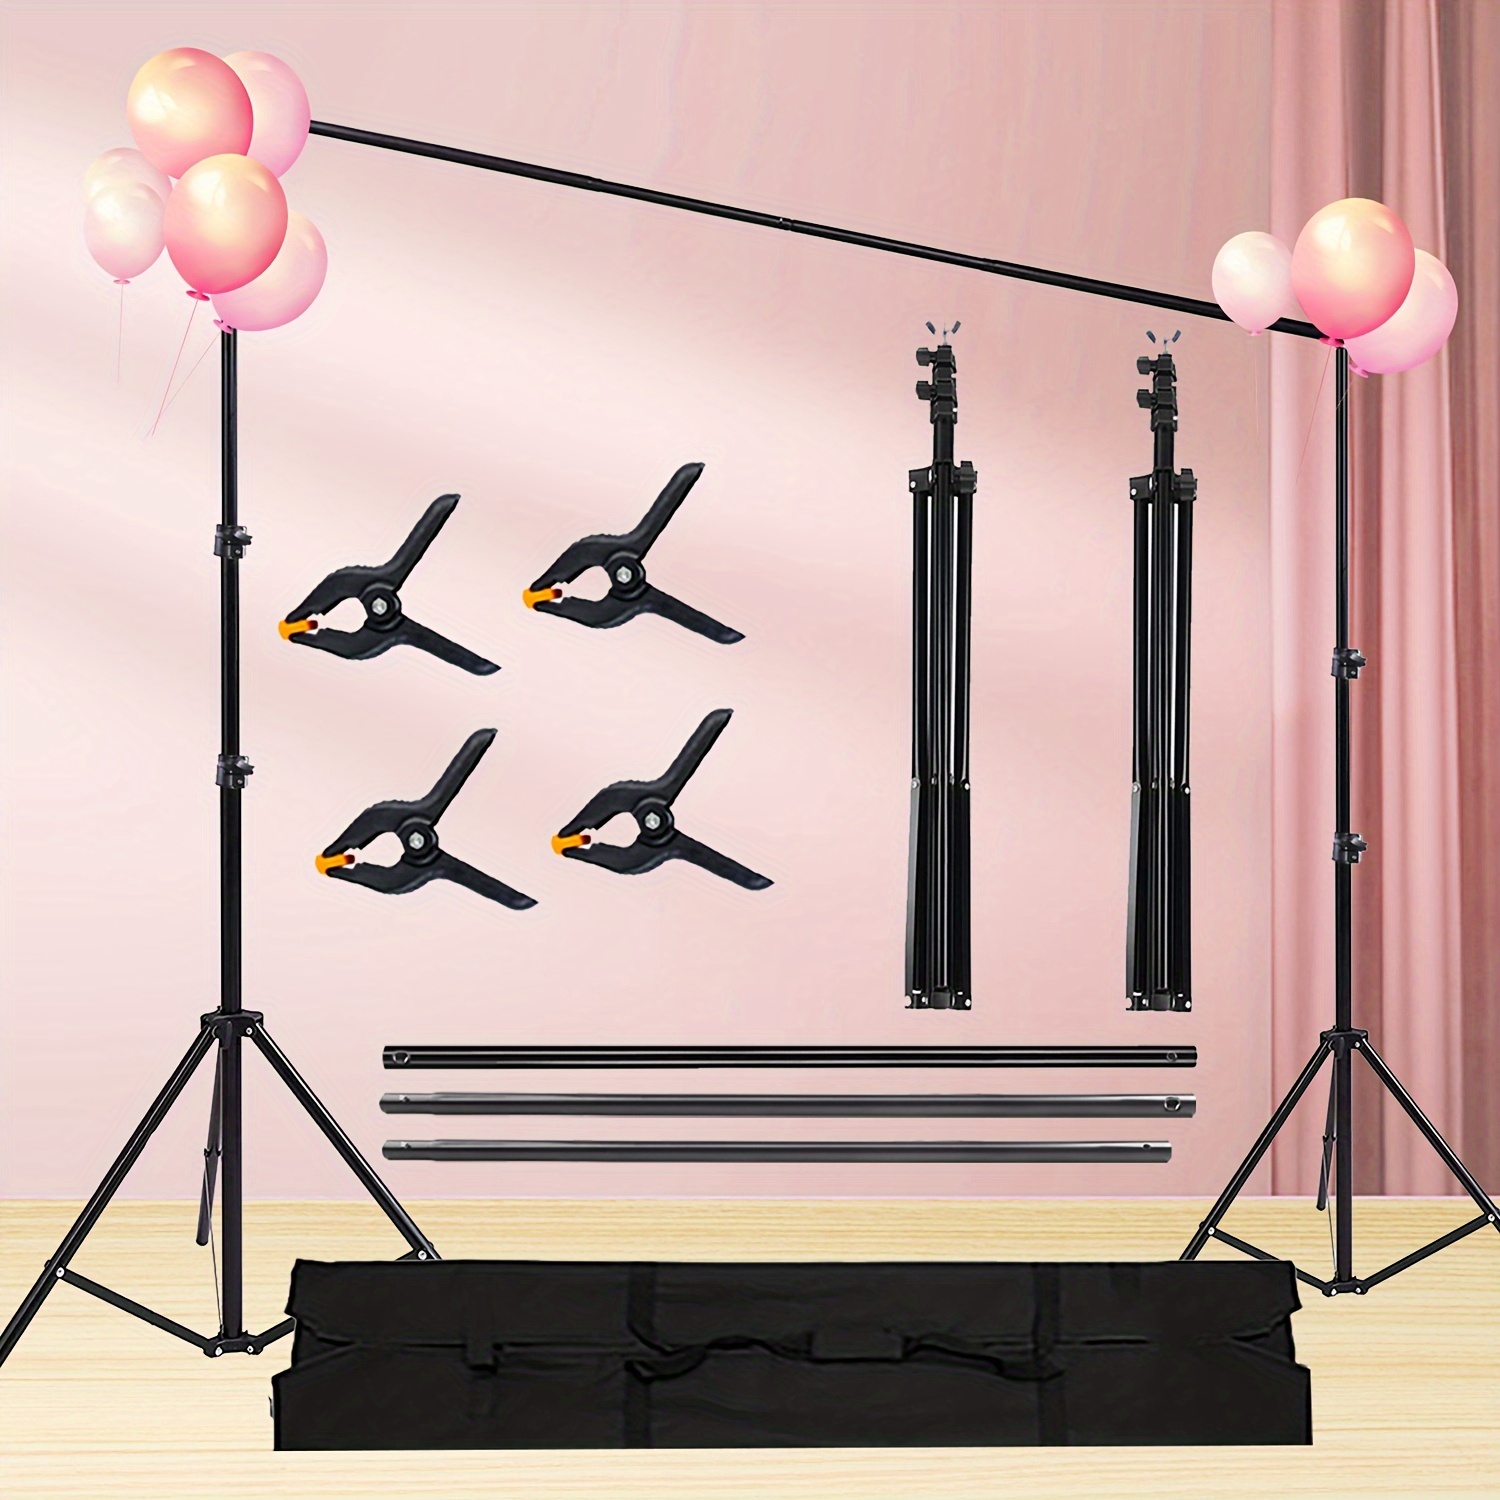 Backdrop Stand Kit 7x7ft/2x2m,adjustable Photo Video Studio Background  Stand Backdrop Support System For Wedding Parties,birthday, Portrait  Photography With 4 Clamps And Carrying Bag, Don't Miss These Great Deals